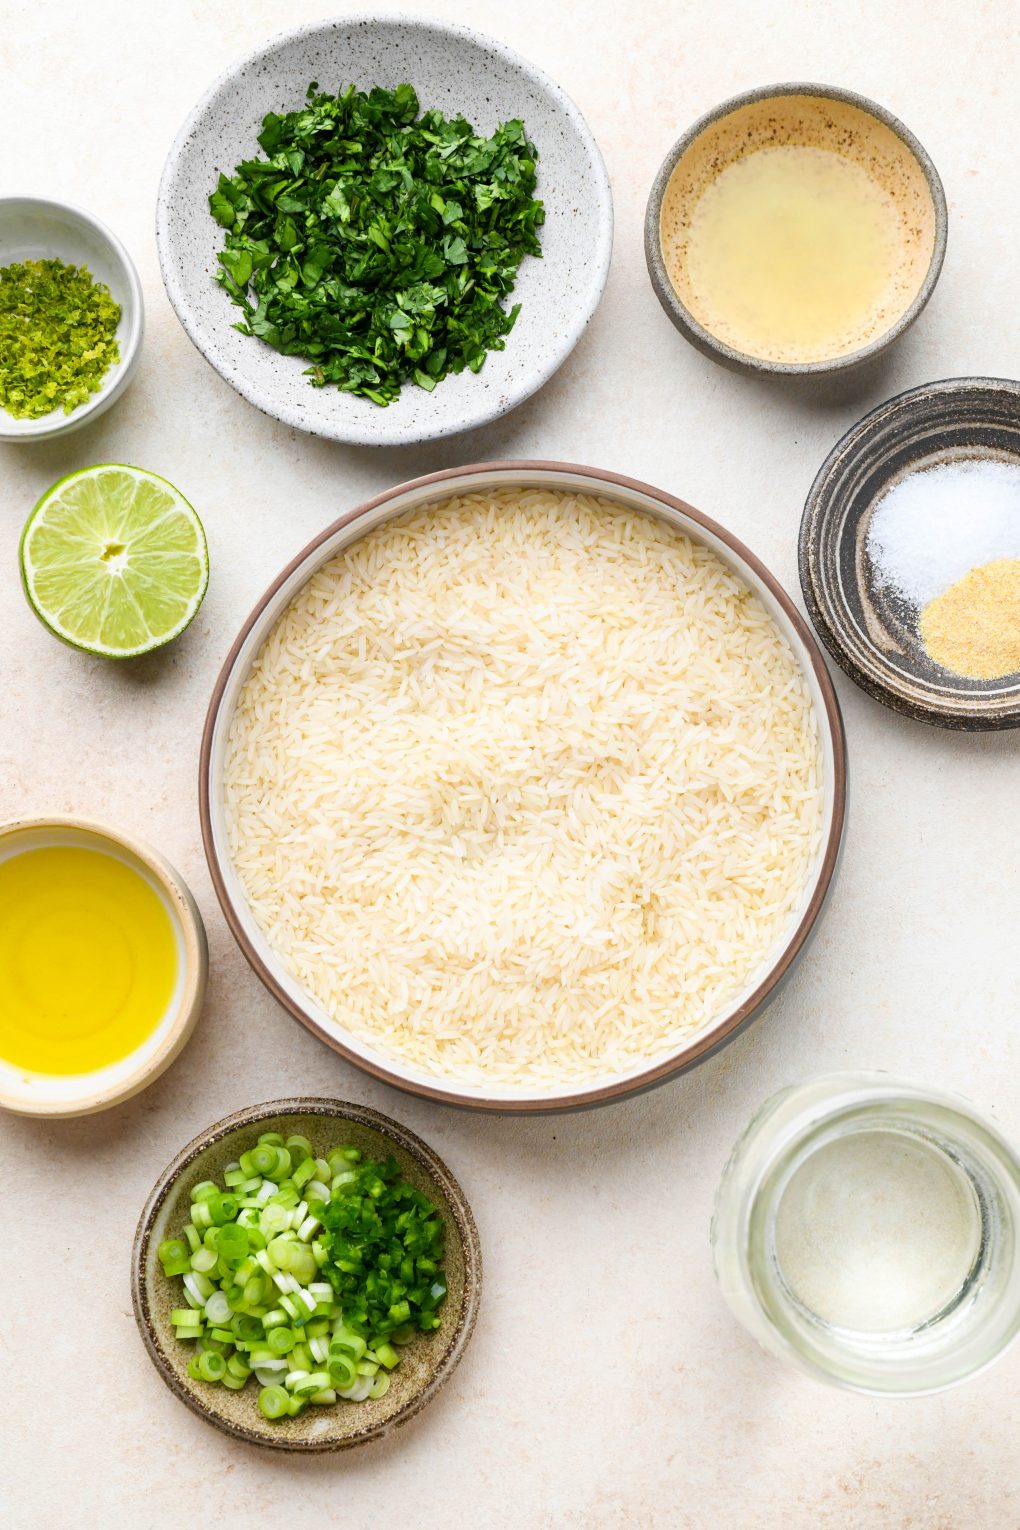 Cilantro lime rice ingredients in various sized ceramics on a light cream colored background.